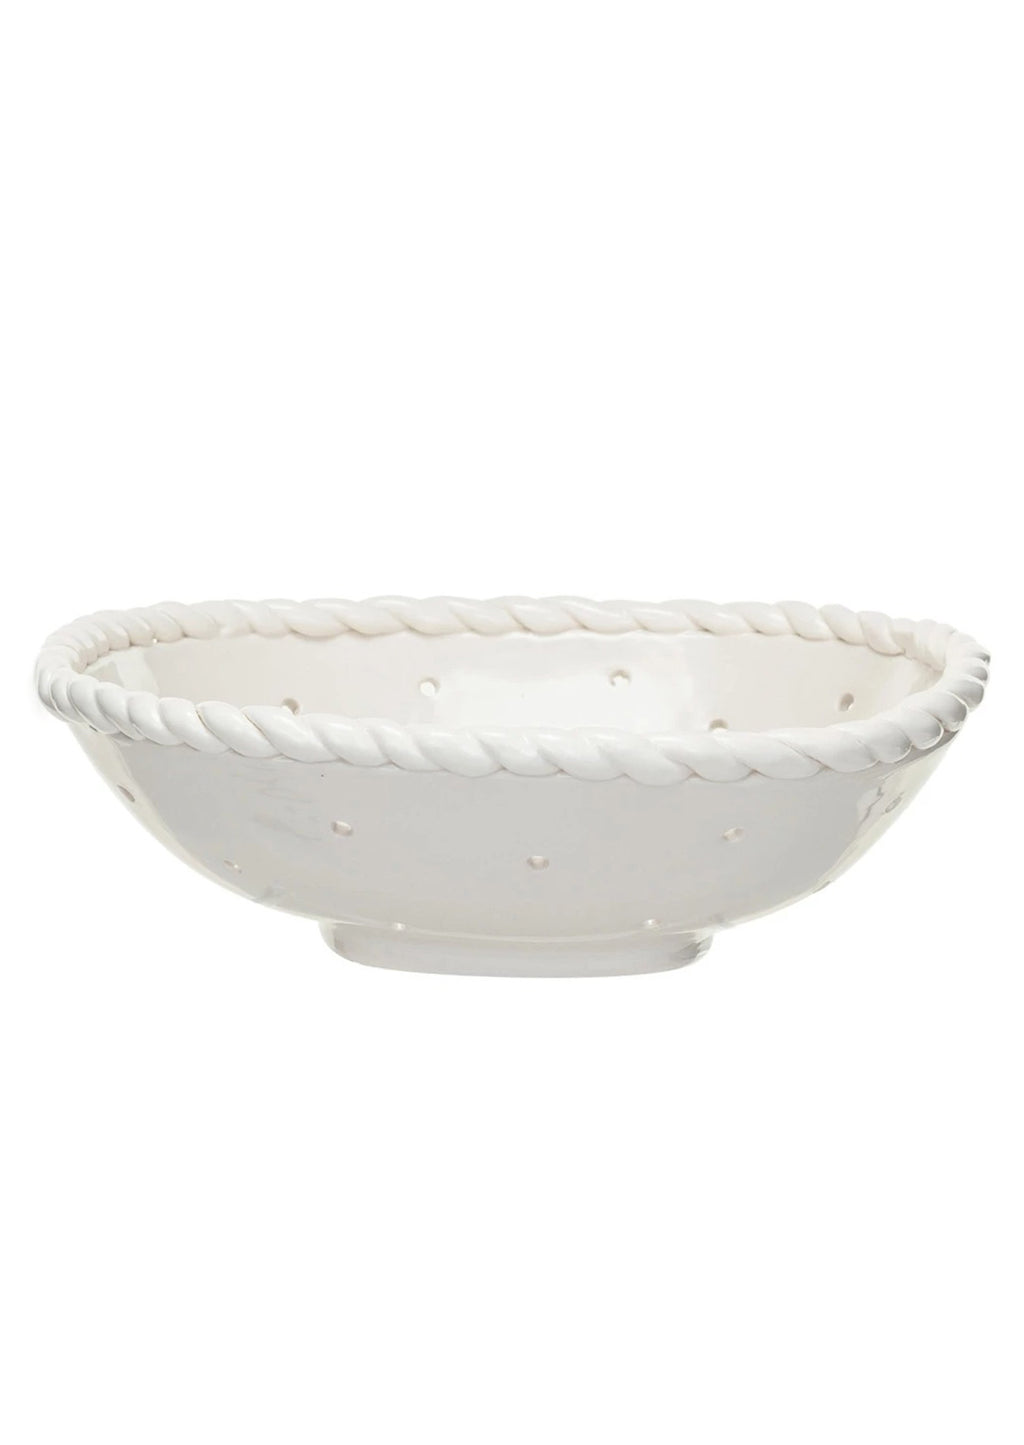 2: A white stoneware colander with twisted "rope" rim.